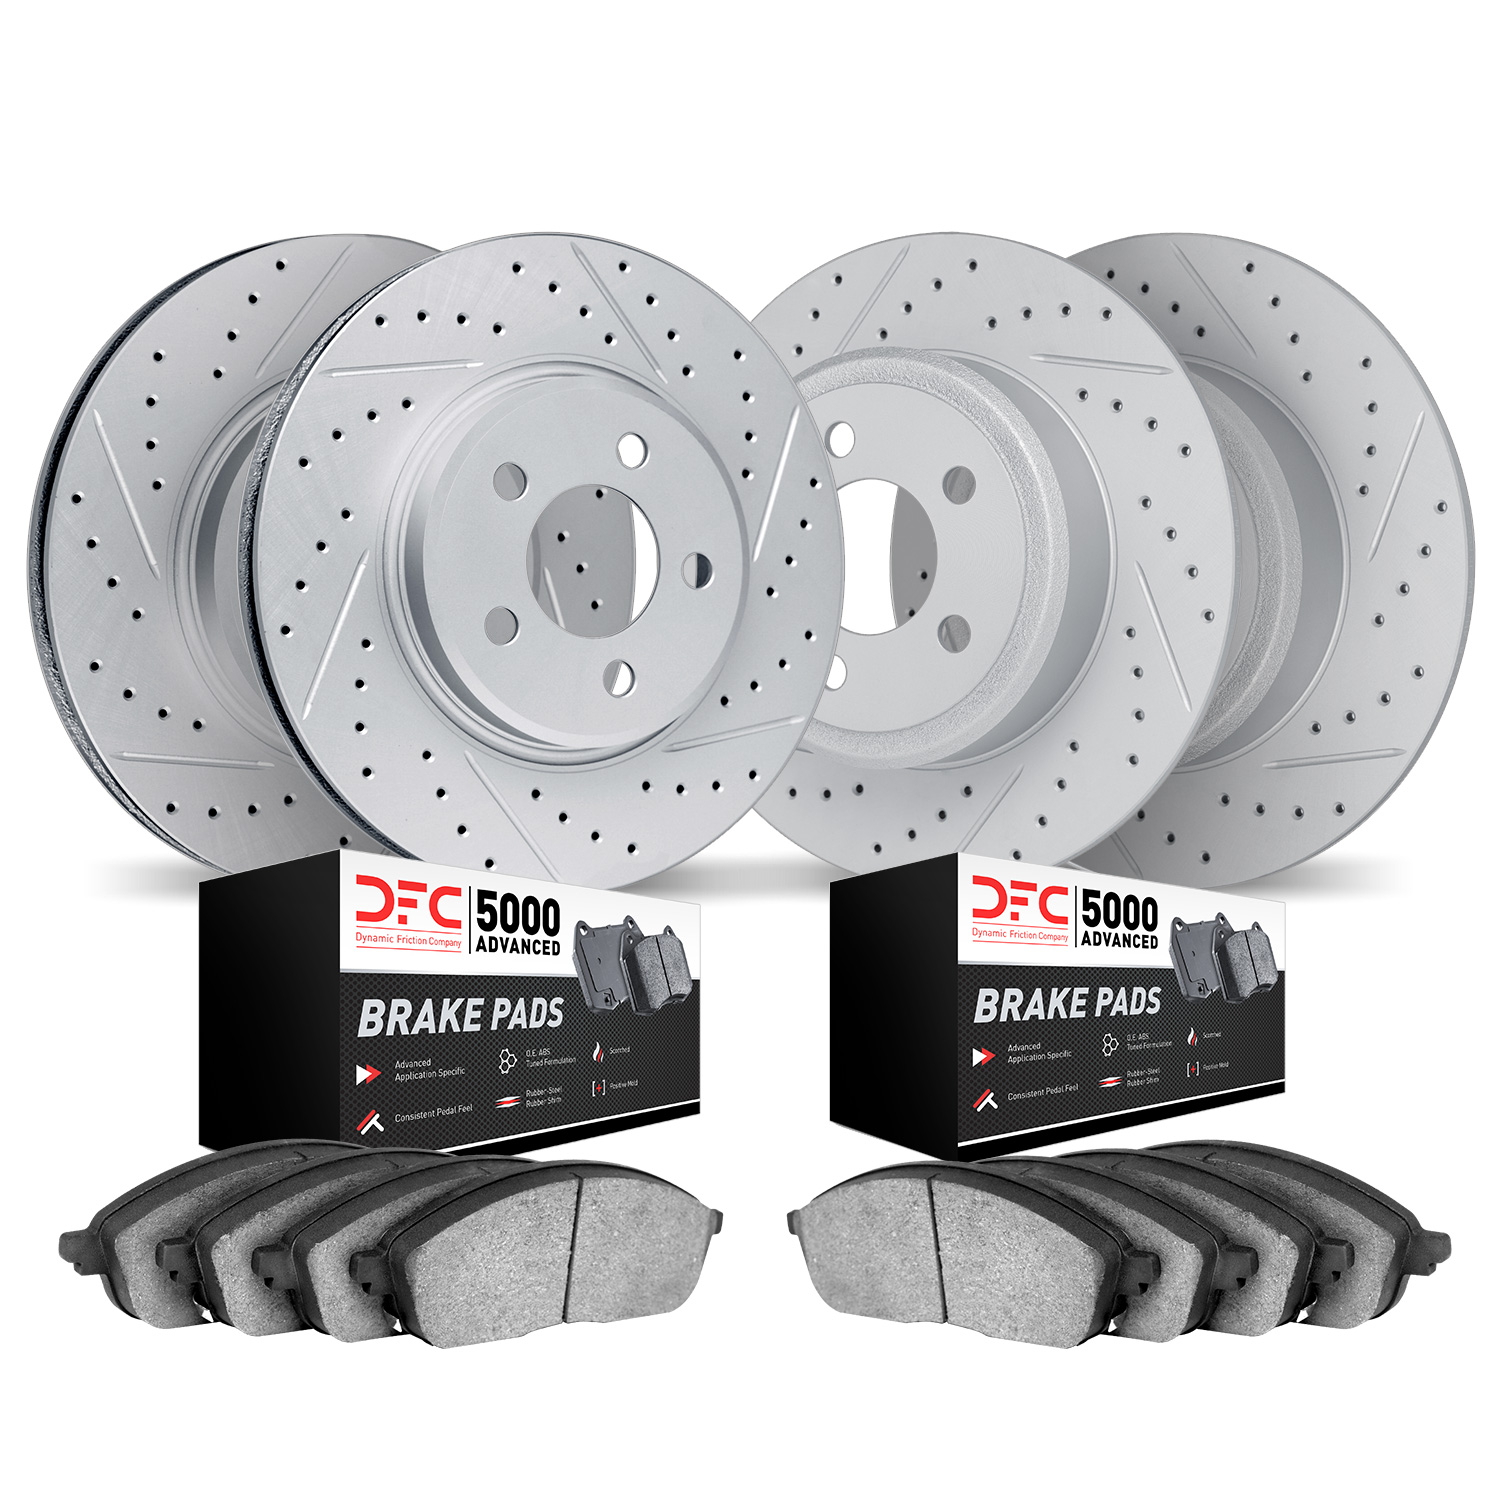 2504-52007 Geoperformance Drilled/Slotted Rotors w/5000 Advanced Brake Pads Kit, 2005-2005 GM, Position: Front and Rear